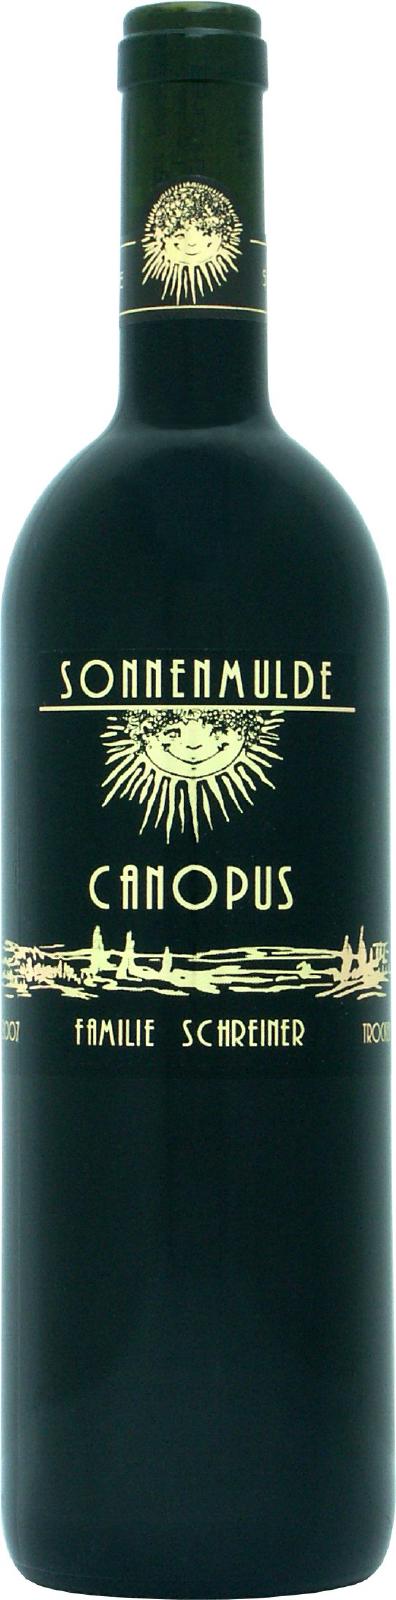 A bottle of Canopus